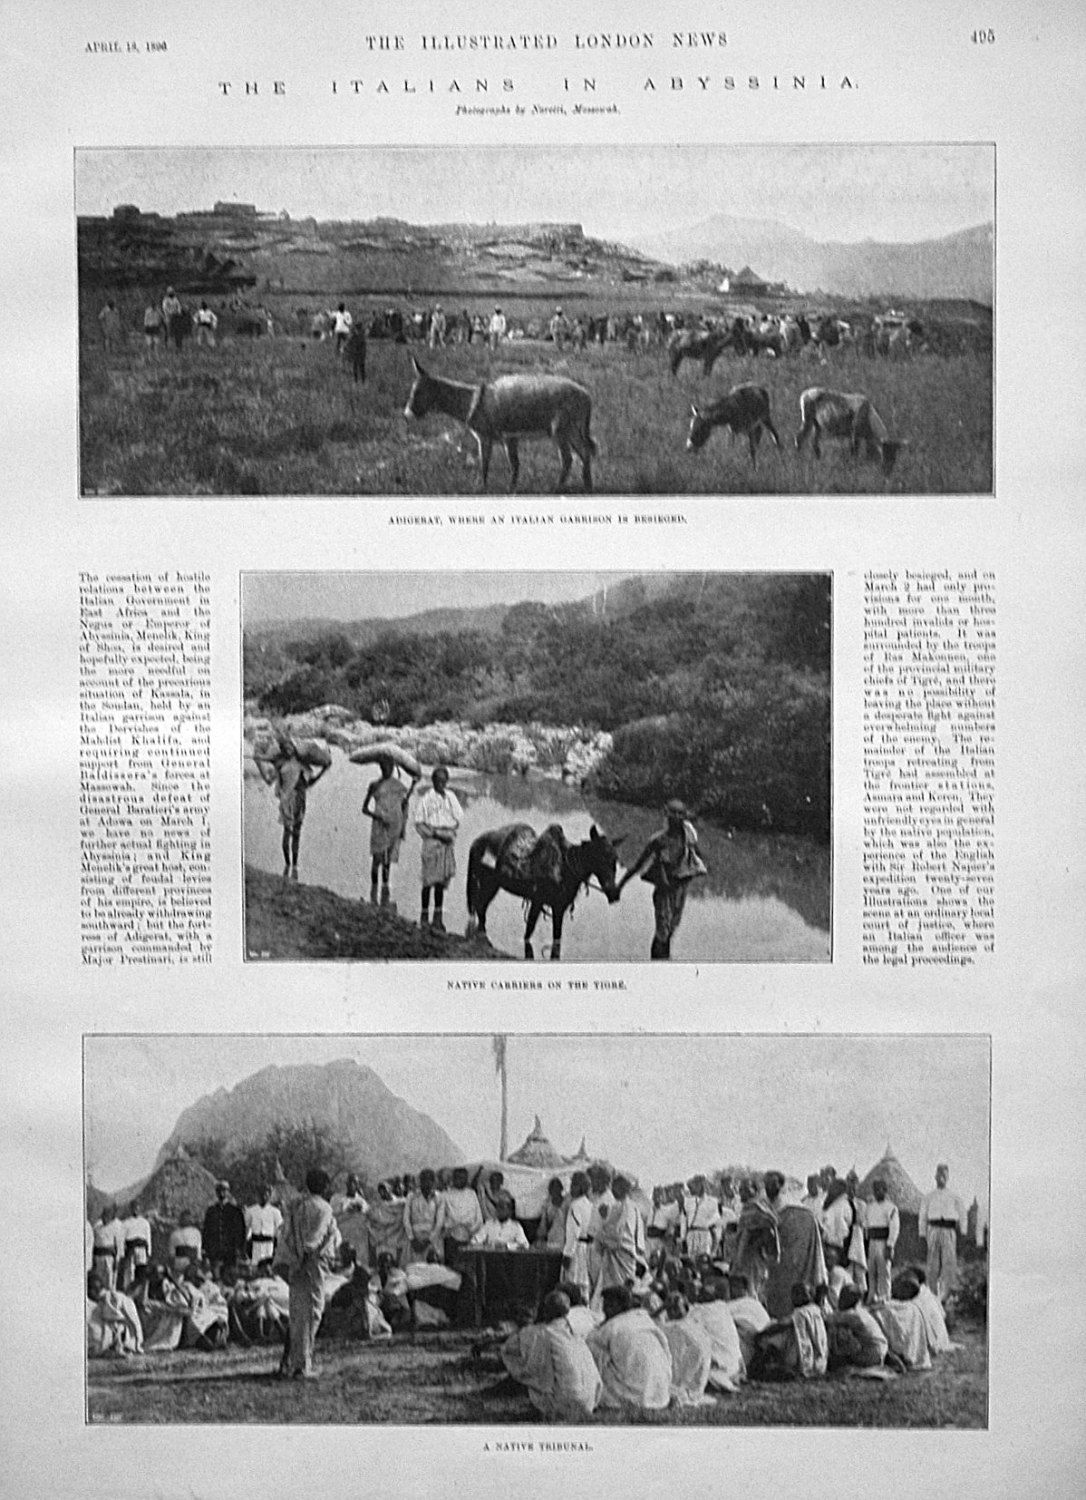 The Italians in Abyssinia. 1896